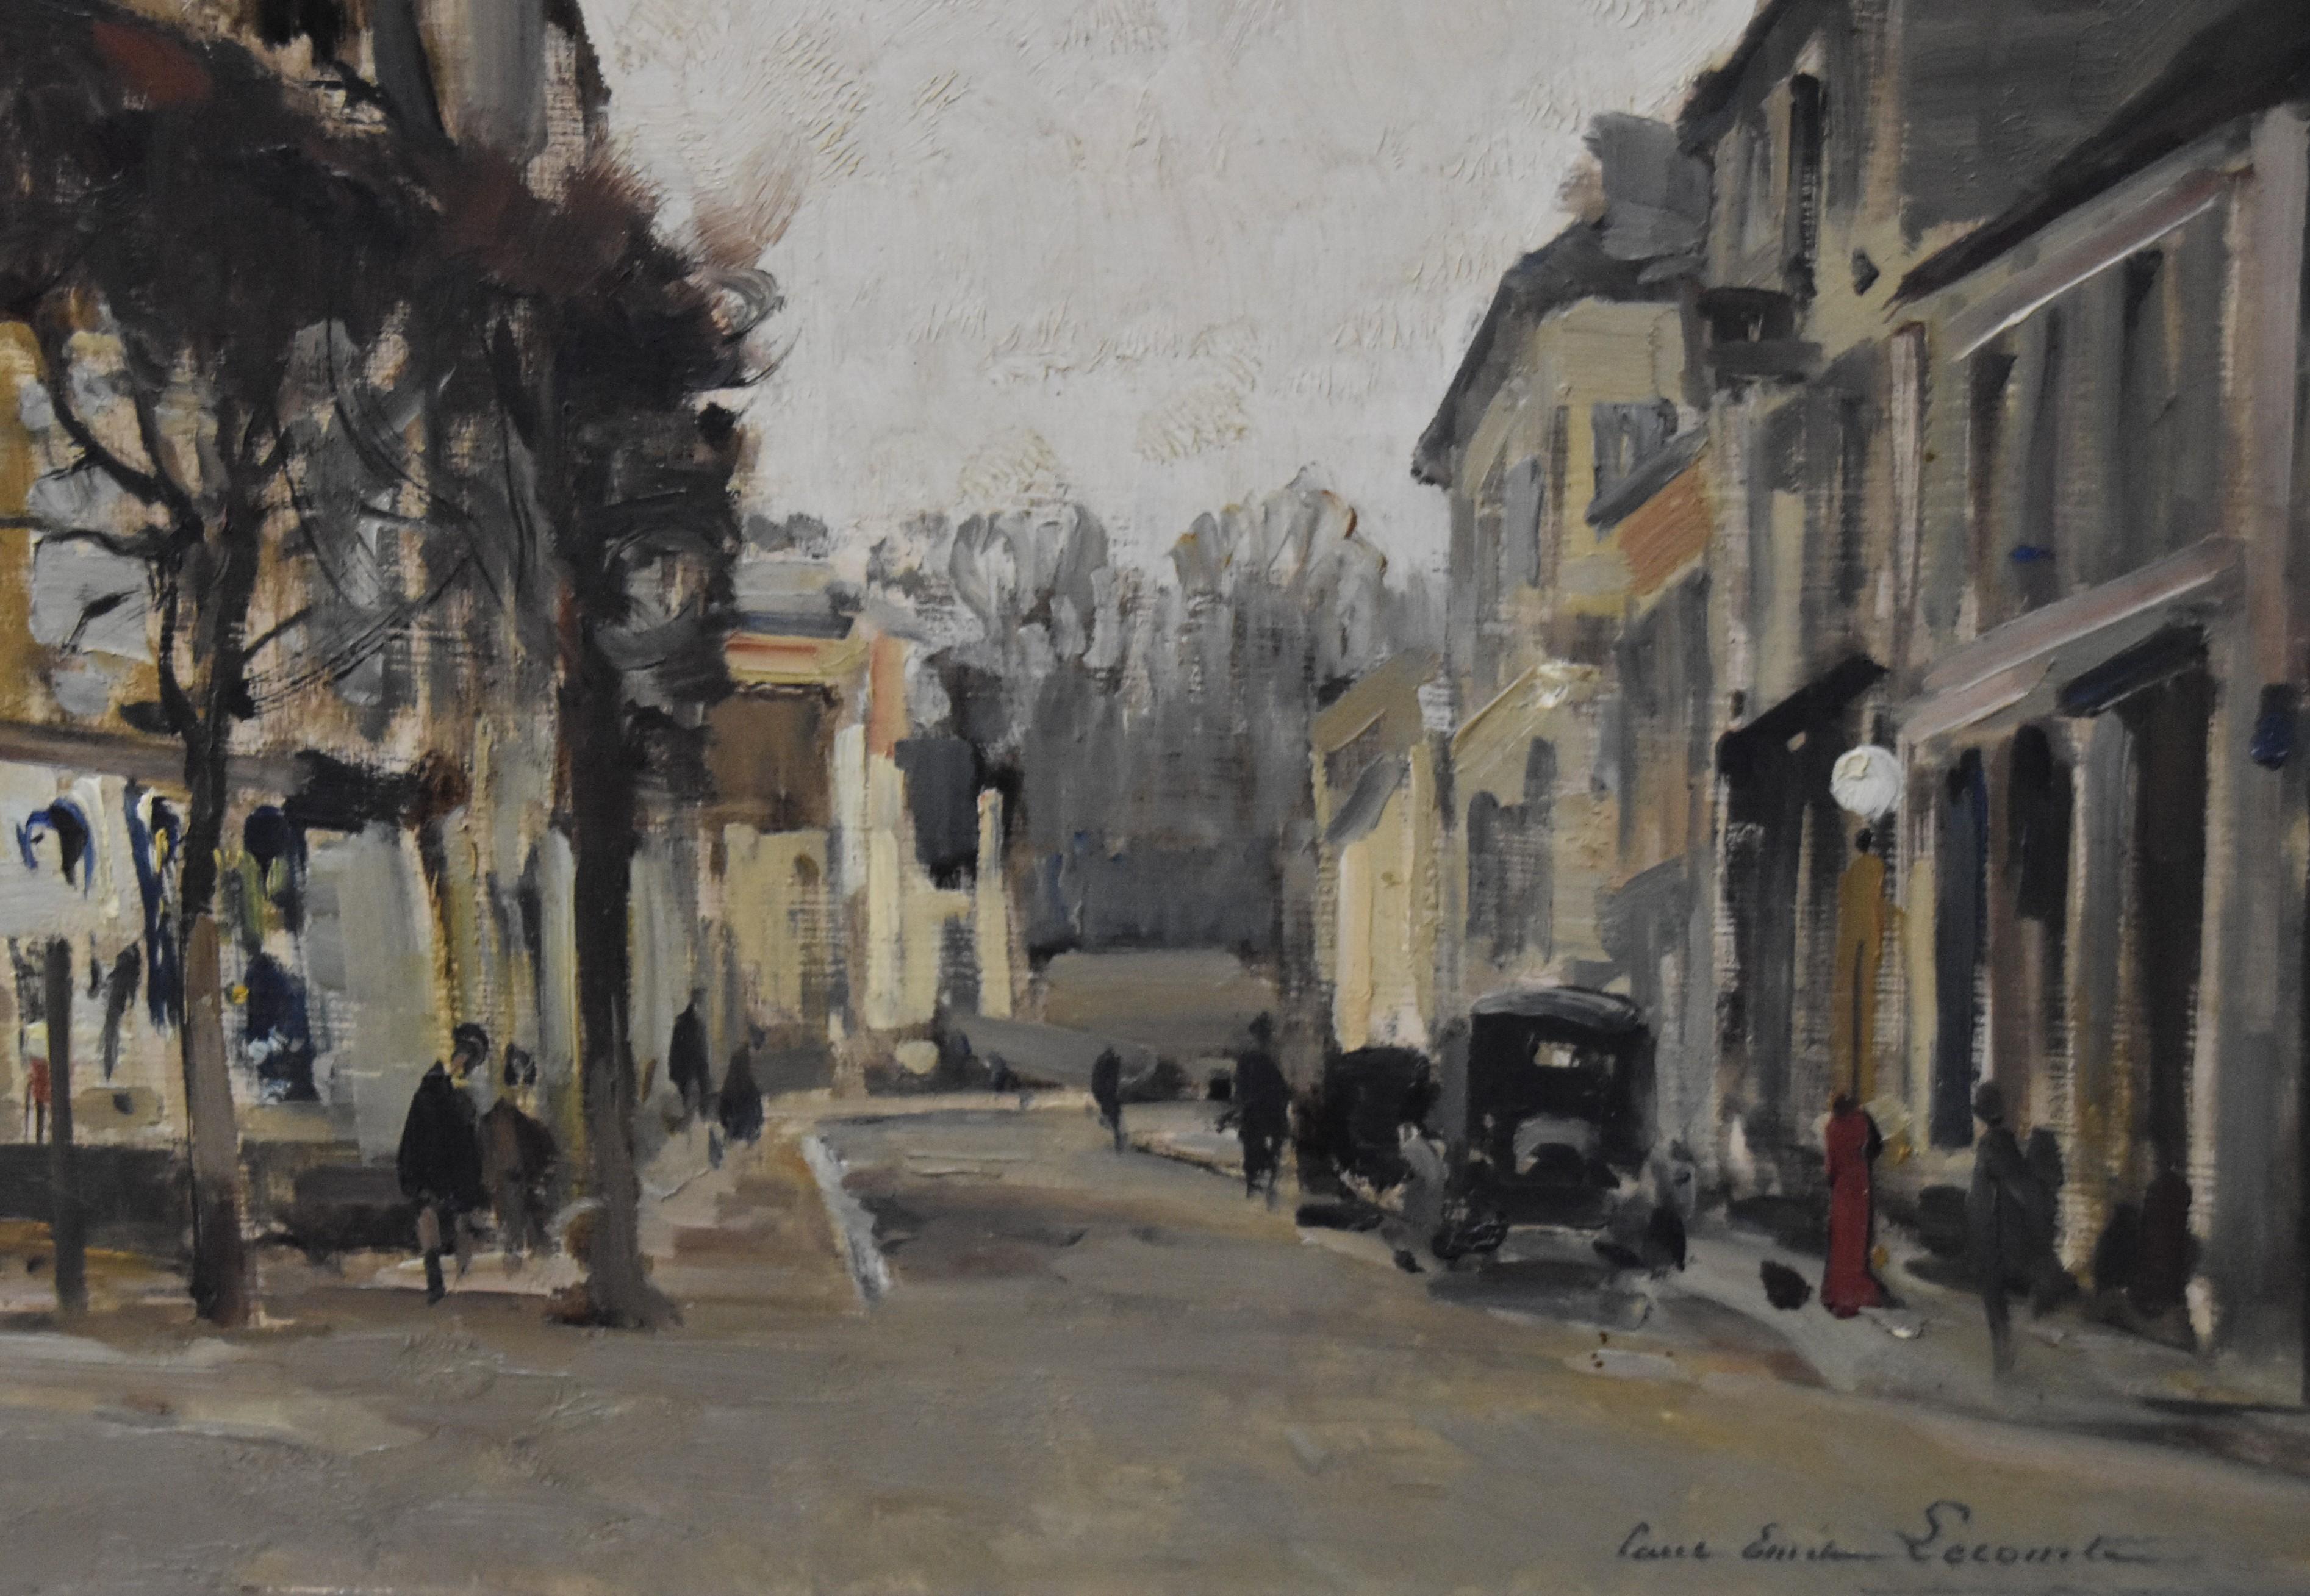 Paul Emile Lecomte (1877-1950)
Rue de France, Melun
Signed on the lower right
Oil on wood panel
37.5 x 46 cm 
Framed  53.5 x  61.5  cm
titled on the back of the panel
In good condition

 
Paul Emile Lecomte was born on October 29, 1877 in Paris.